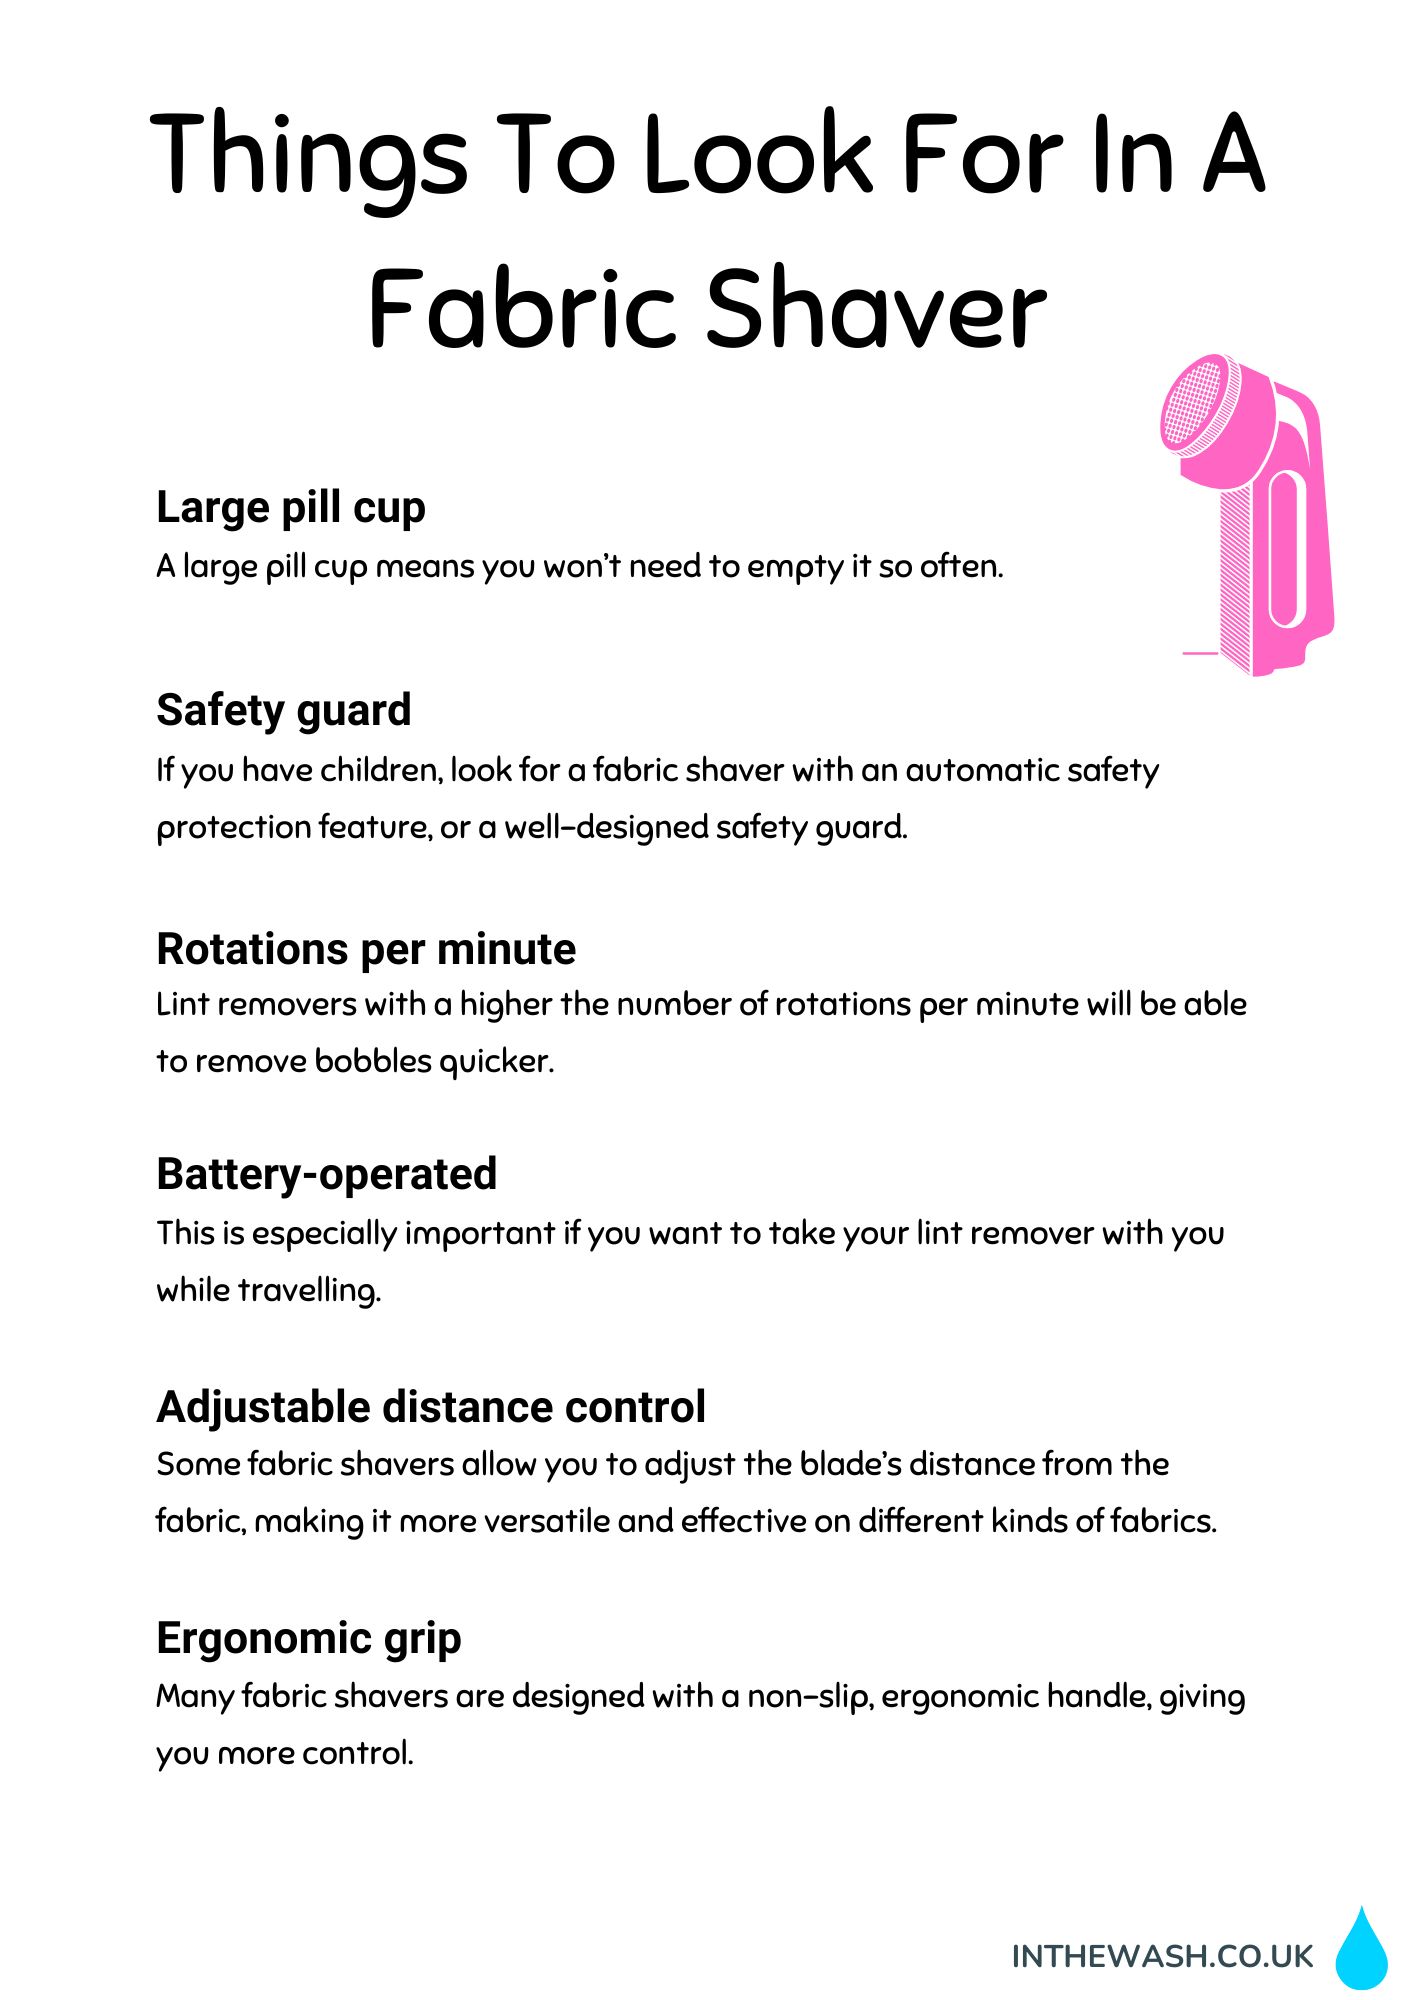 Things to look for in a fabric shaver